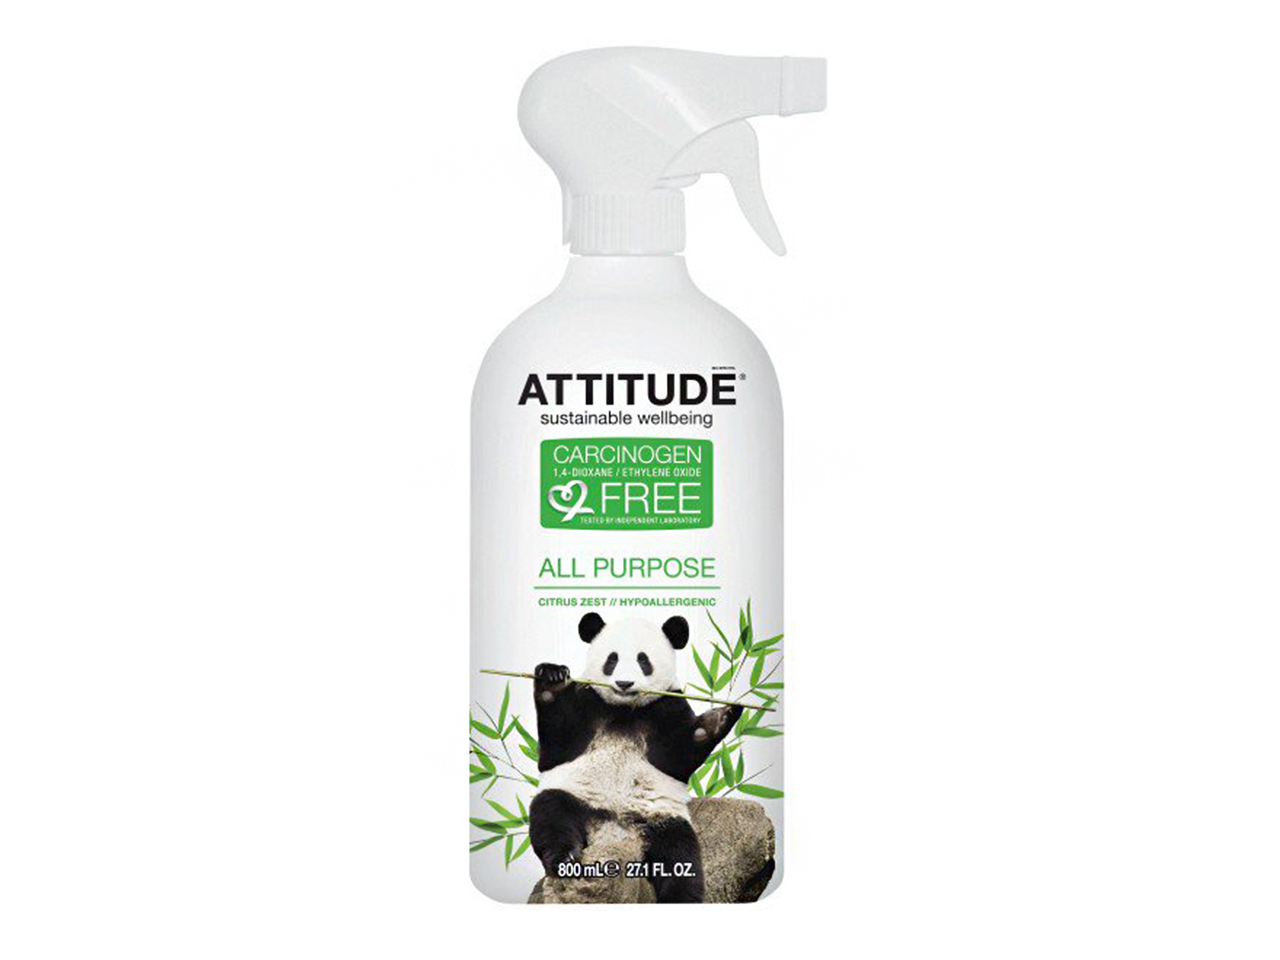 Eco-friendly cleaners, Attitude spray bottle with panda photo on it